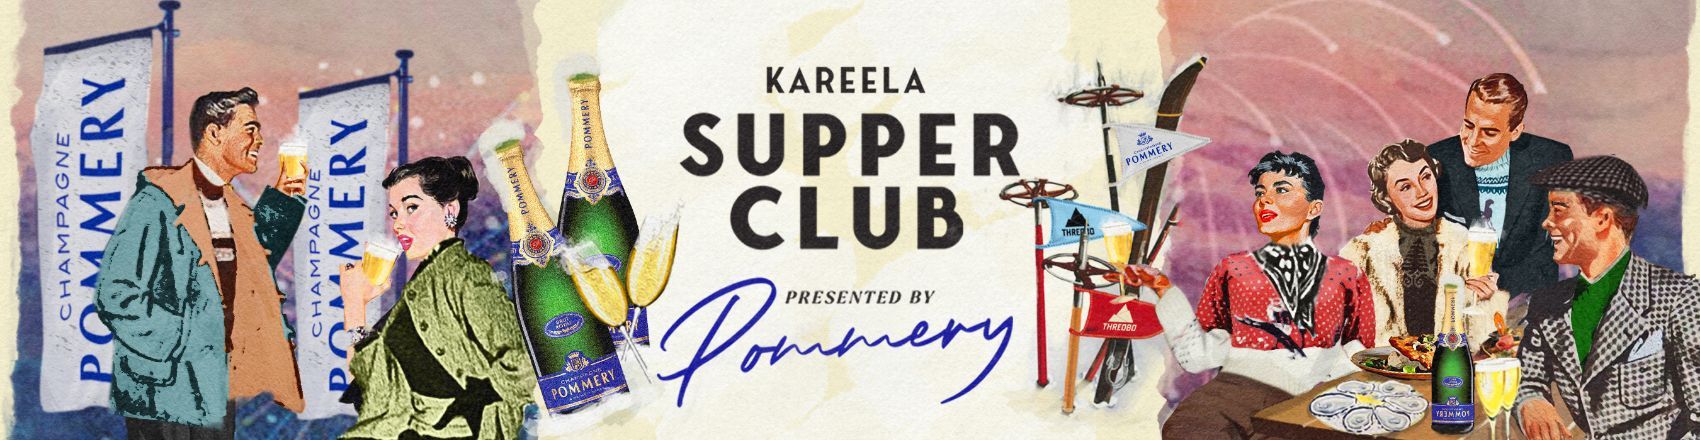 Picture of Kareela Supper Club